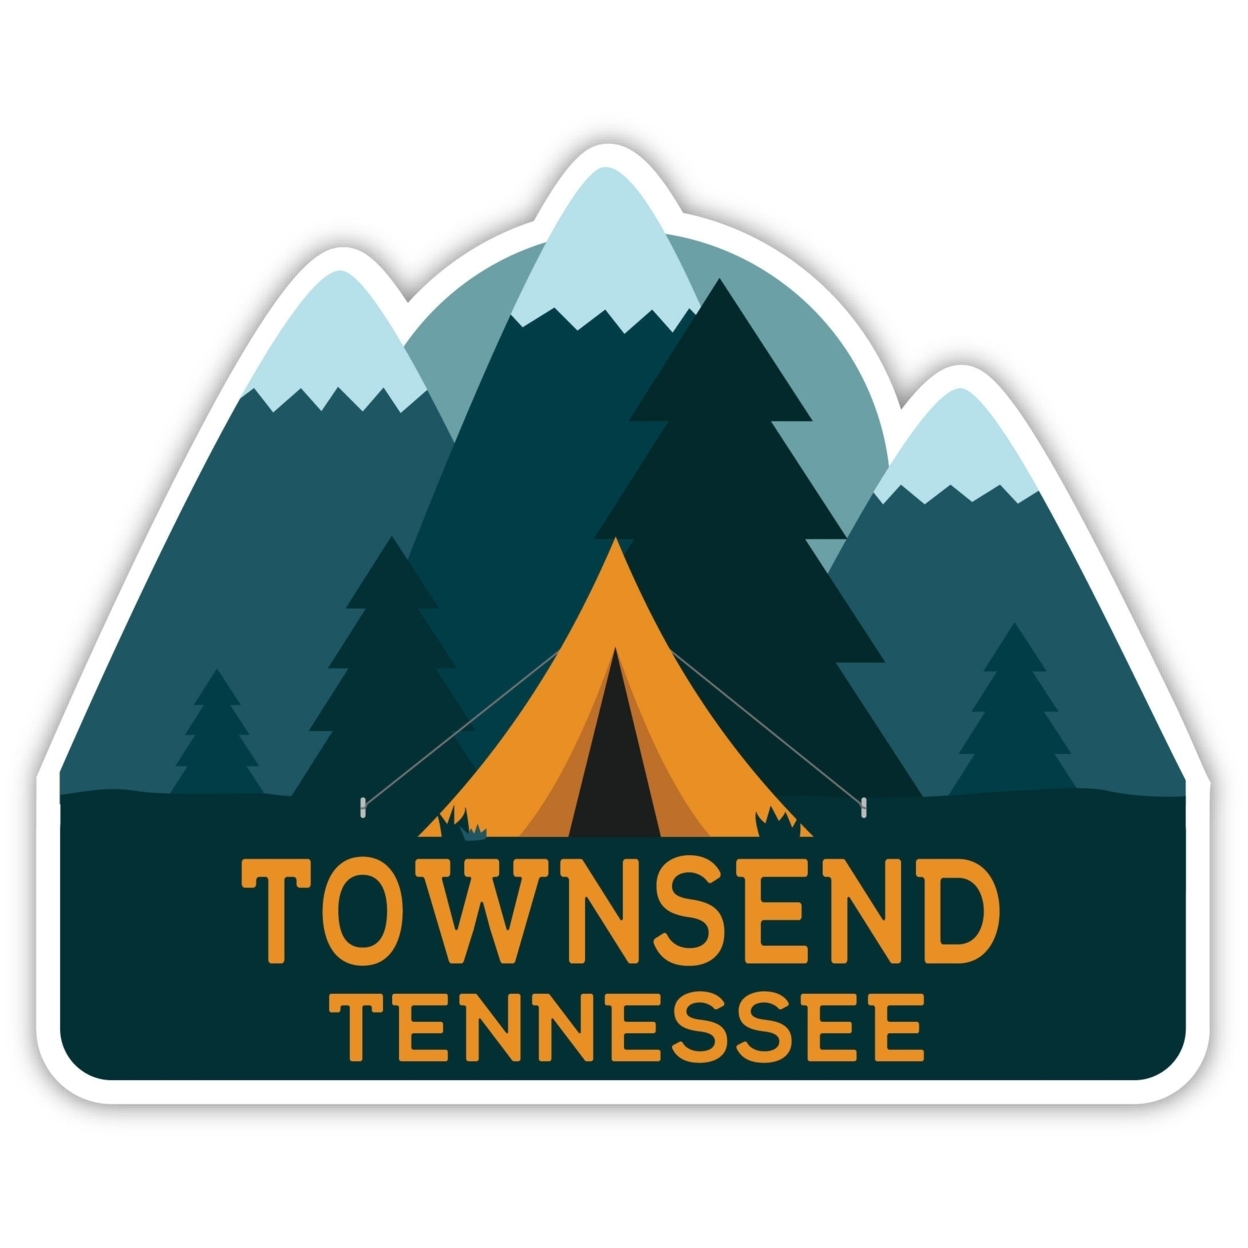 Townsend Tennessee Souvenir Decorative Stickers (Choose Theme And Size) - Single Unit, 4-Inch, Tent